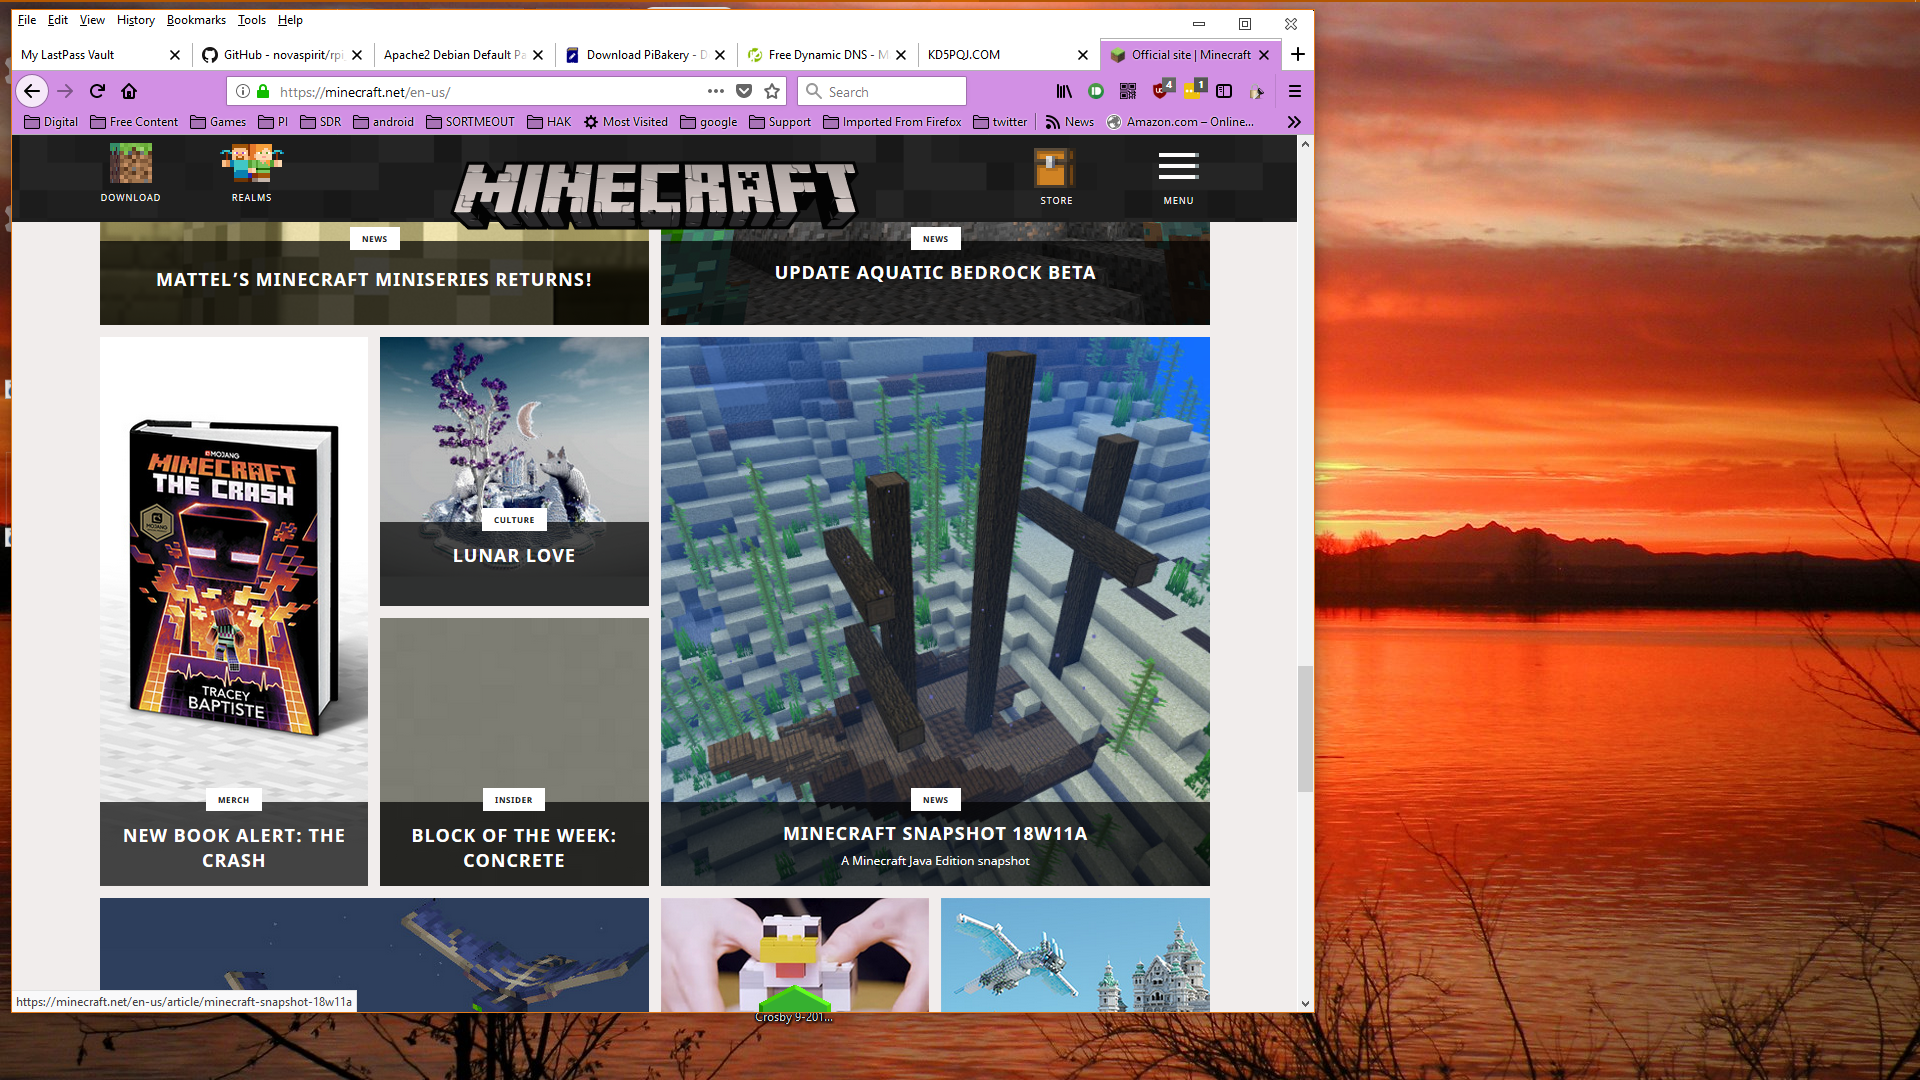 Image of minecraft.net home page scrolled to link to 18w11A page